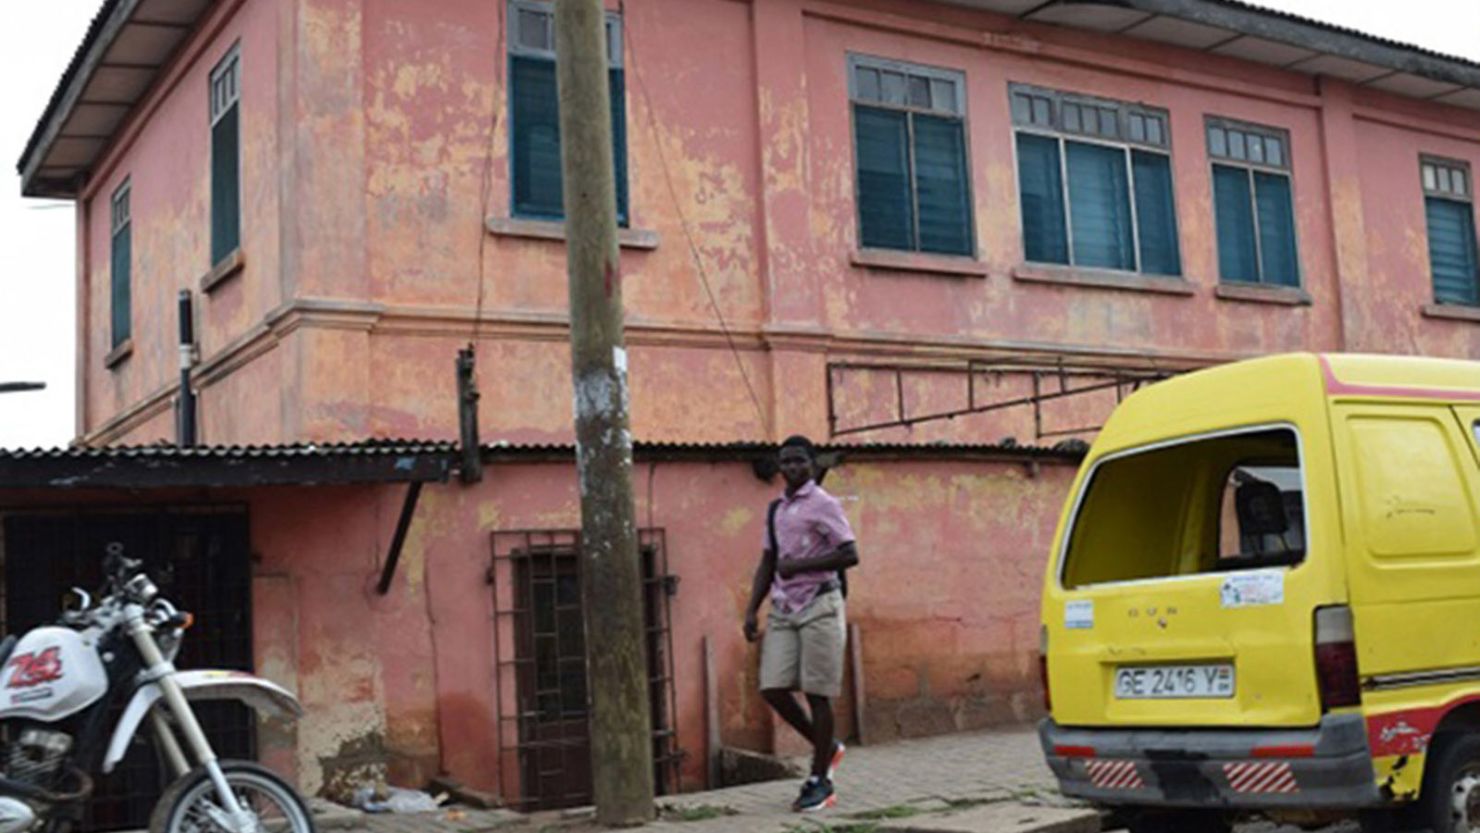  Crooks operated a sham US embassy out of this building in Accra, the US State Department said.